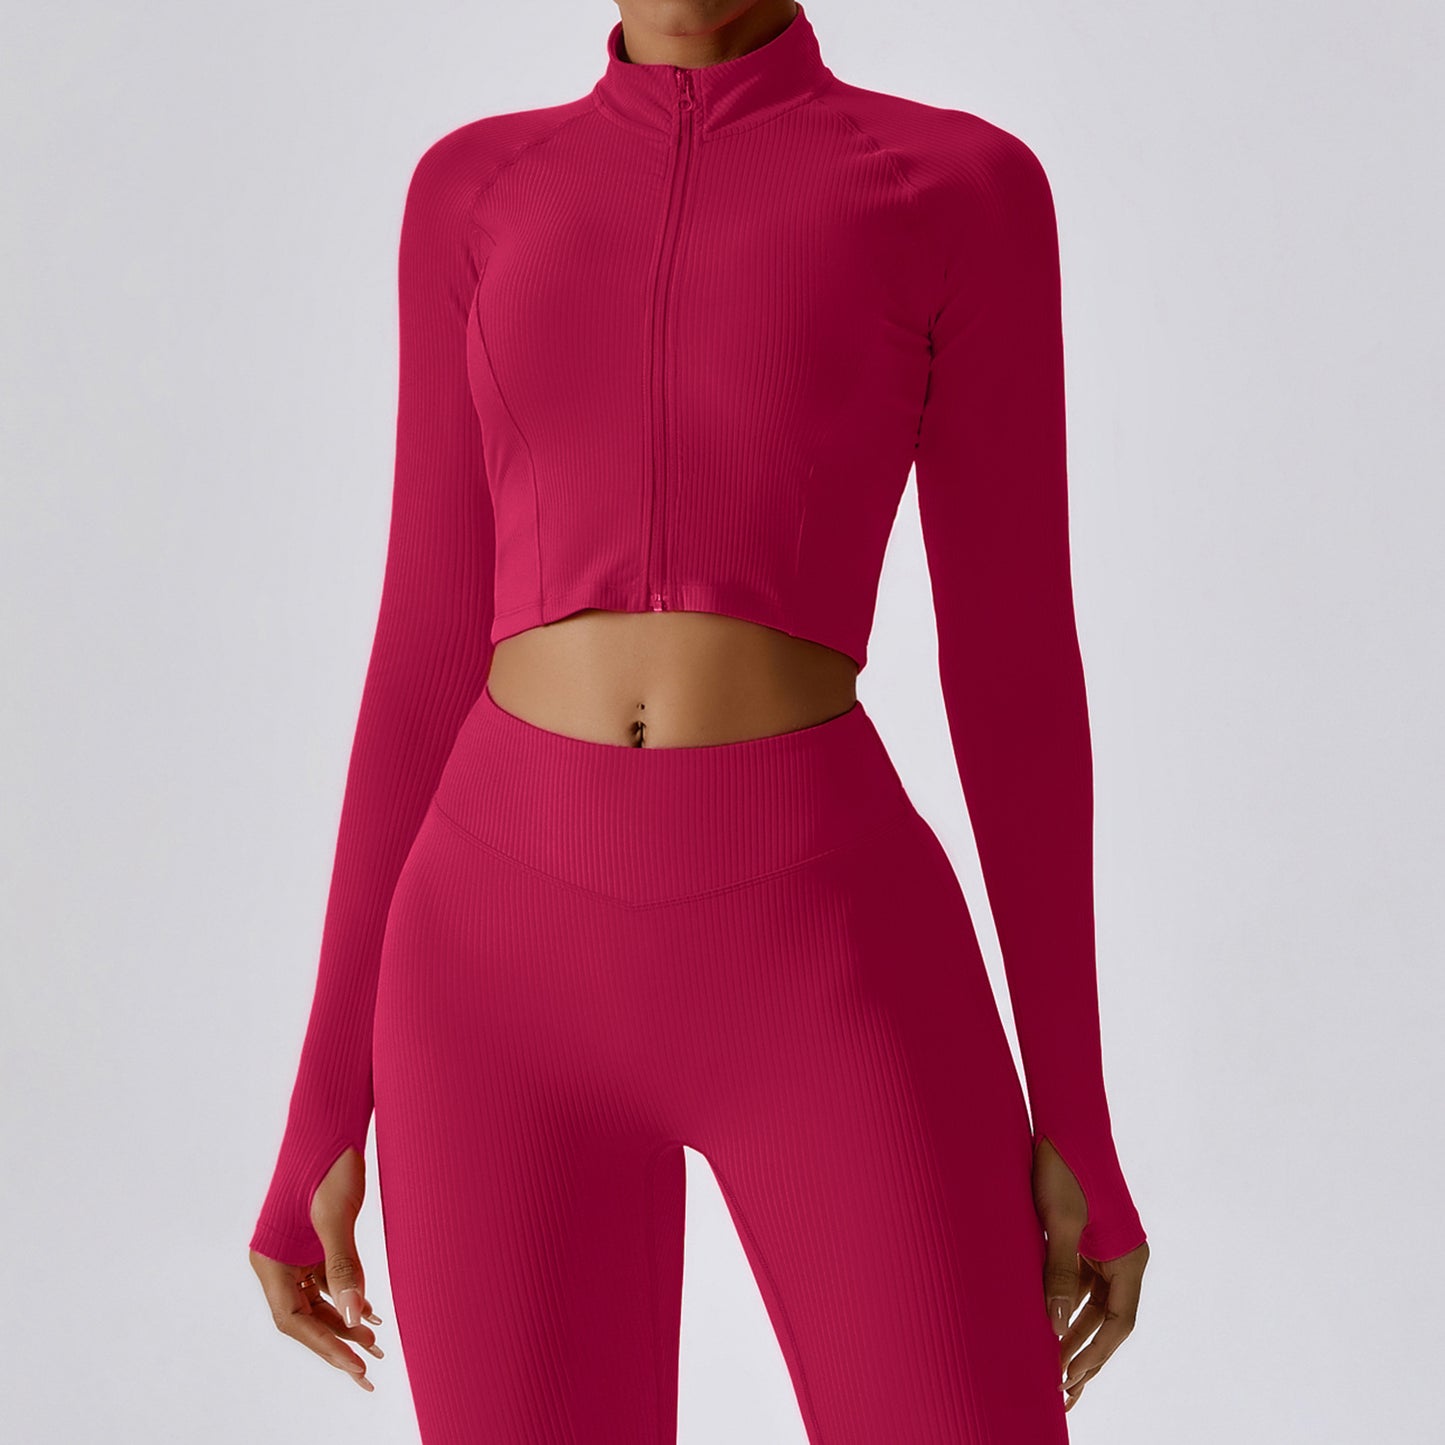 Long Sleeved Yoga Workout Clothes